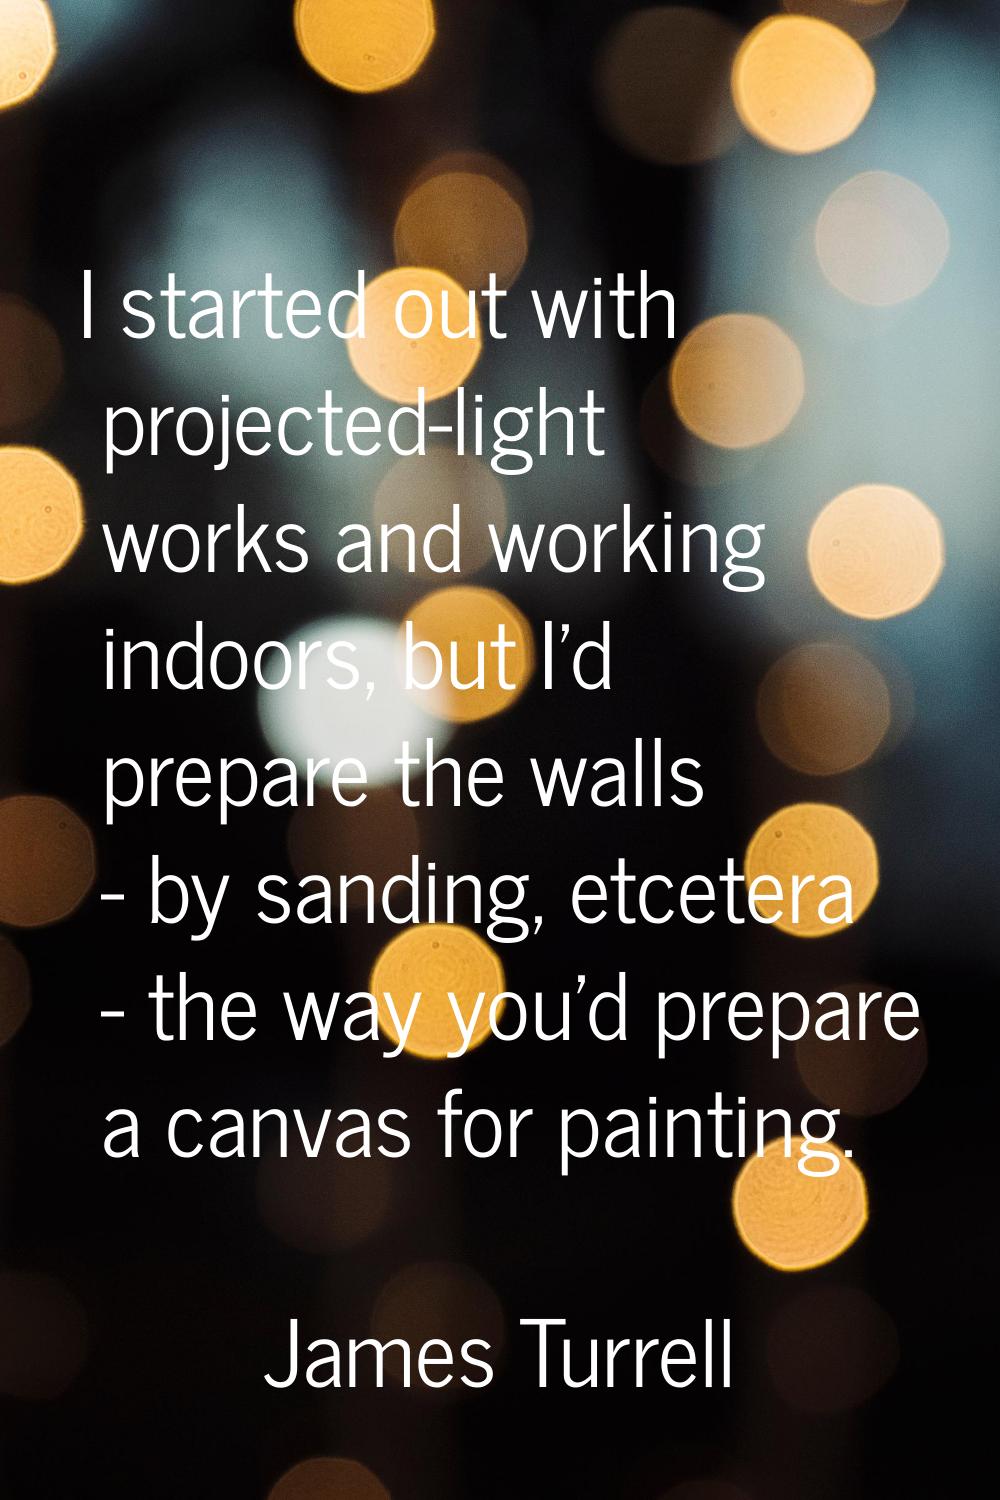 I started out with projected-light works and working indoors, but I'd prepare the walls - by sandin